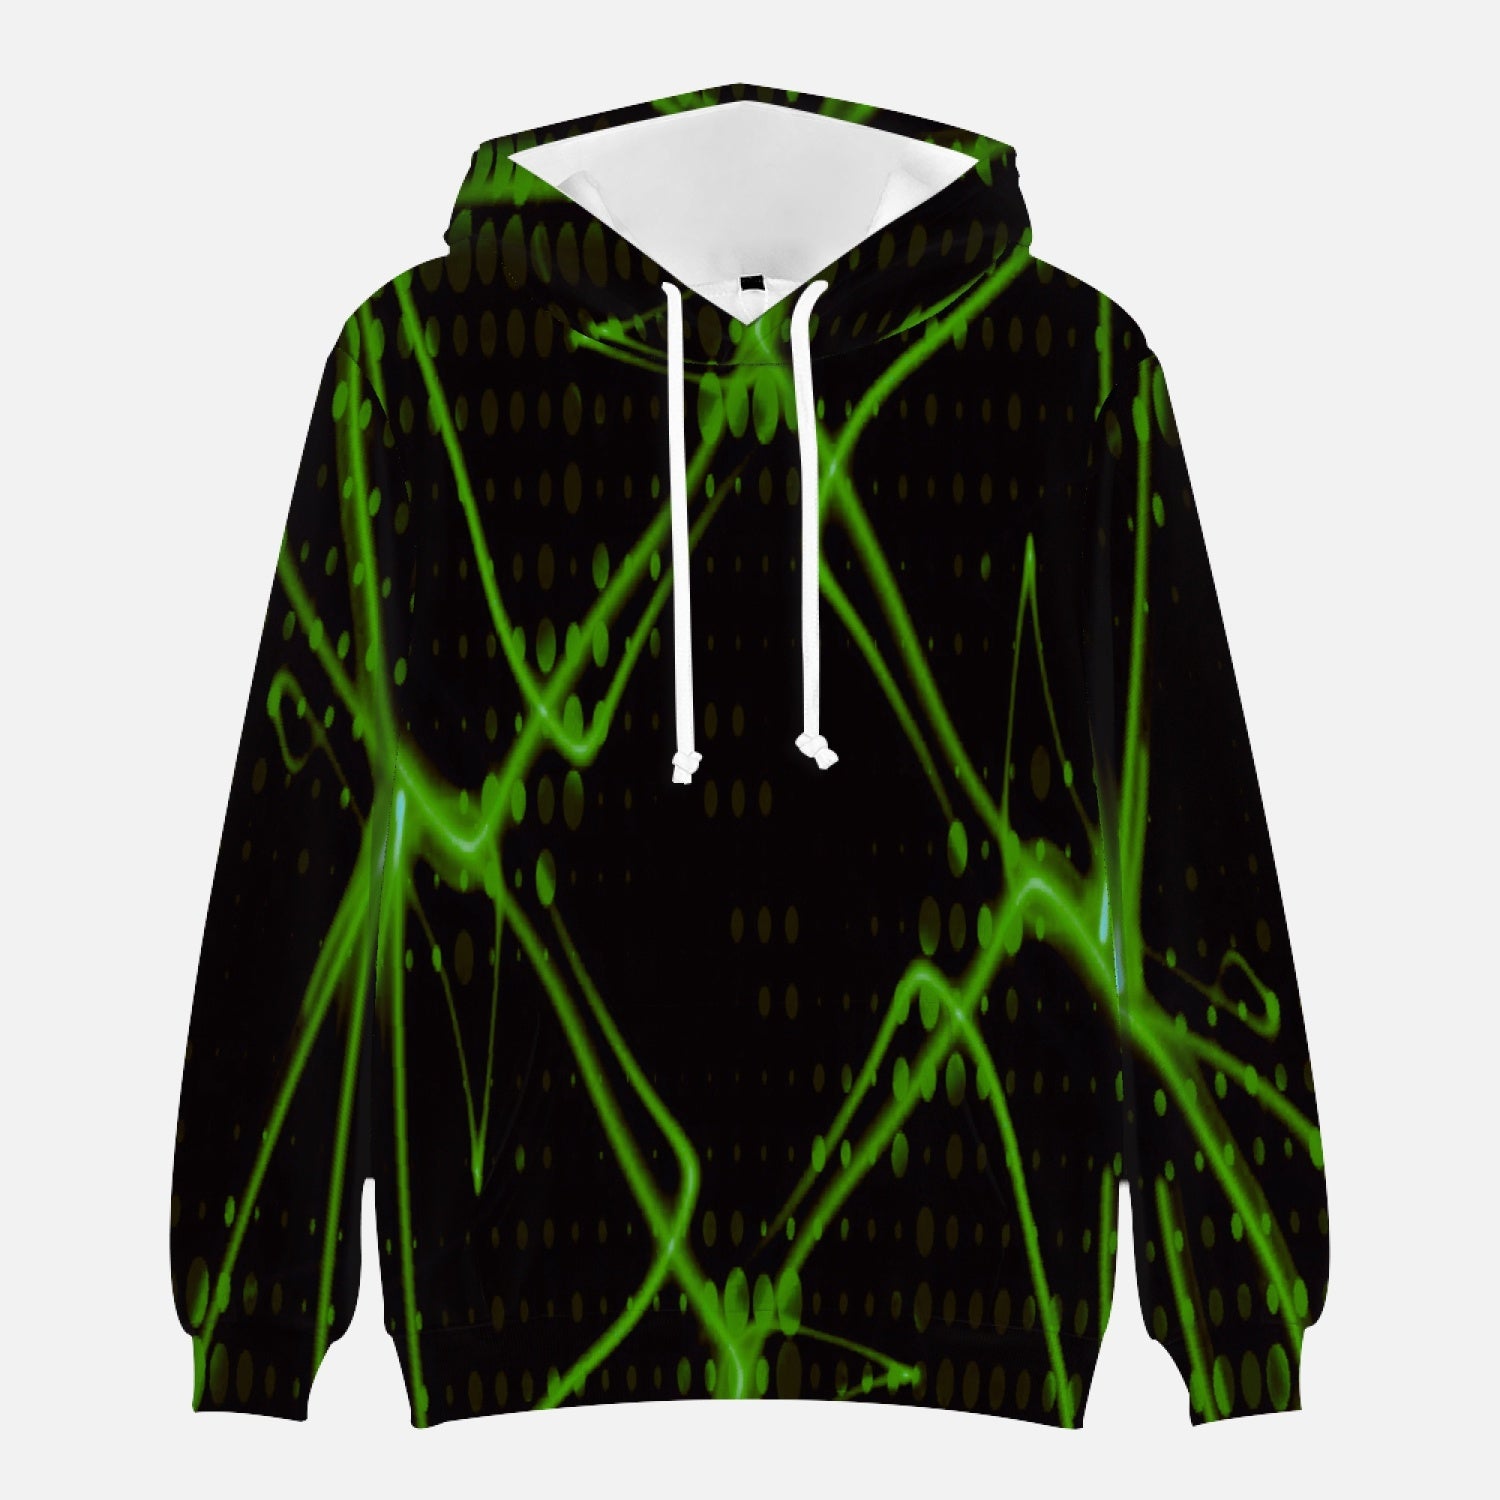 Officially Sexy Green & Black Laser Print Round Collar Hoodie 1.0